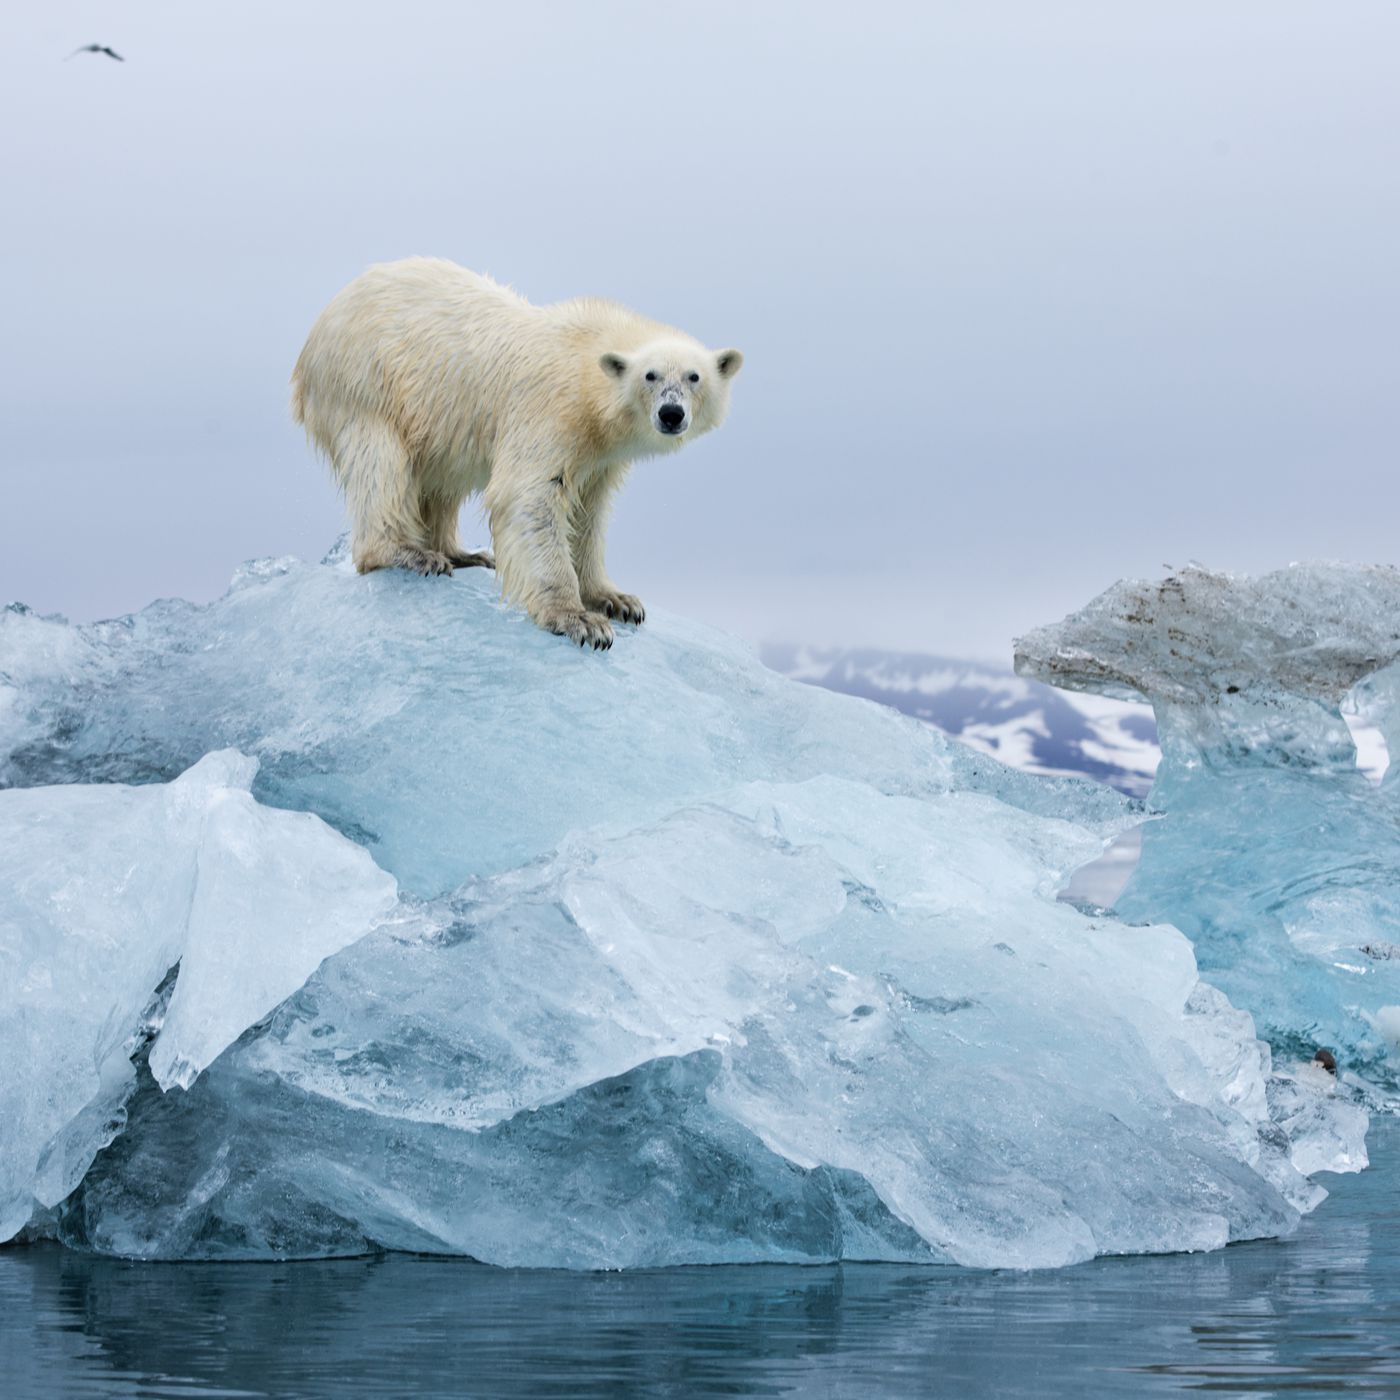 Study finds some hope for polar bears in an Arctic with less sea ice - Vox